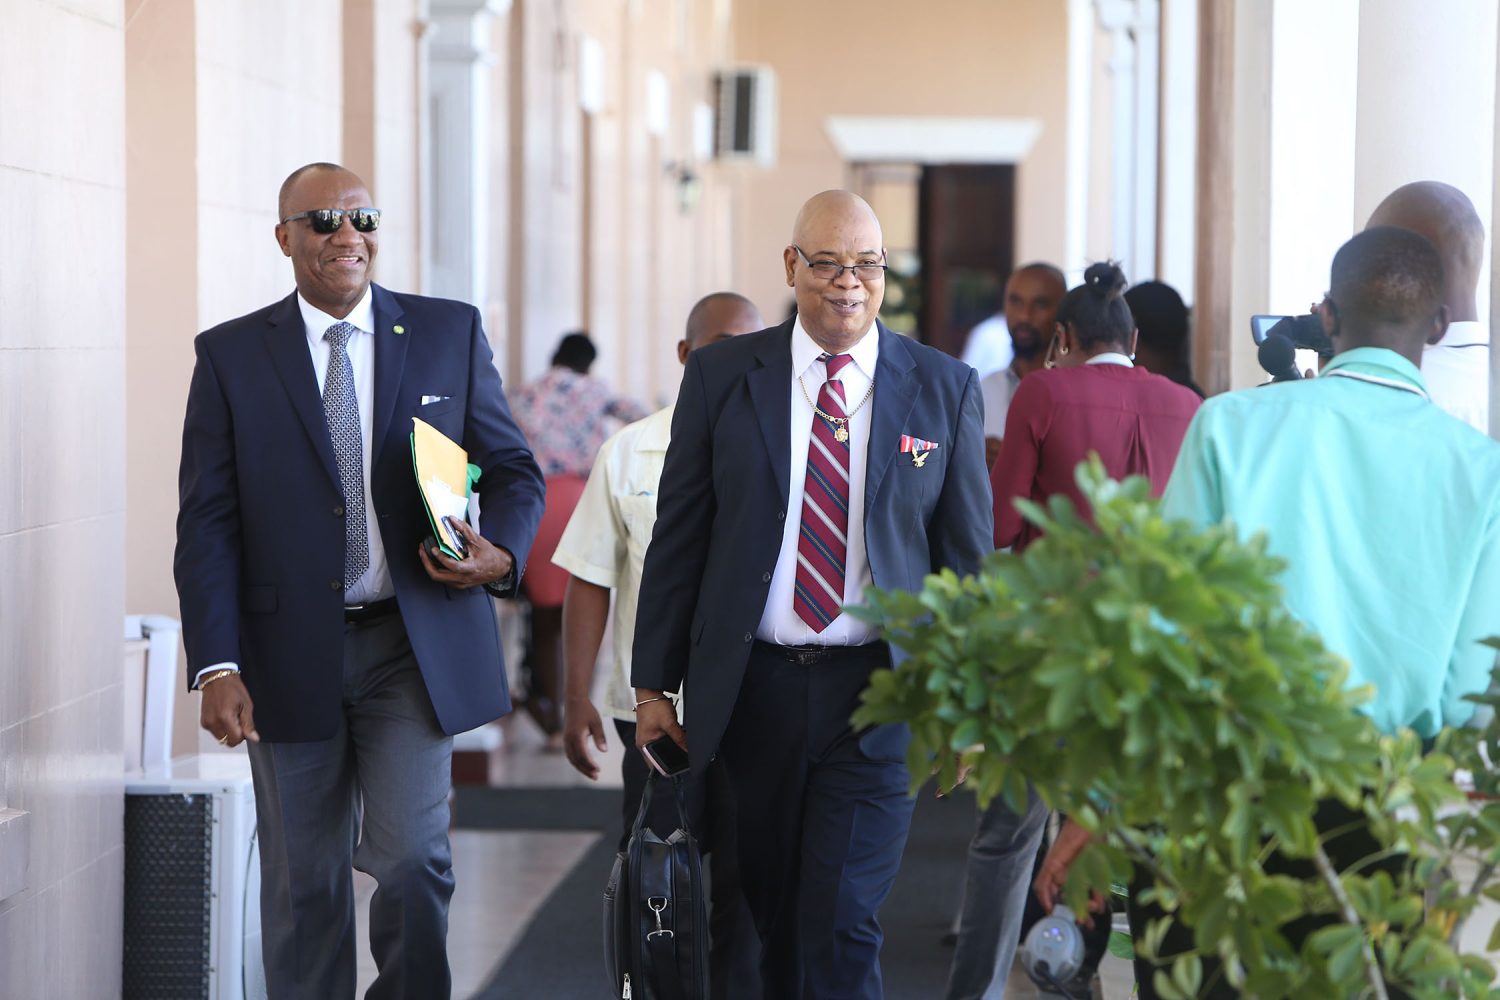 All smiles: Minister of State, Joseph Harmon (left) and PPP/C MP Juan Edghill on their way to Parliament Chambers for Monday’s presentation of the 2018 budget.